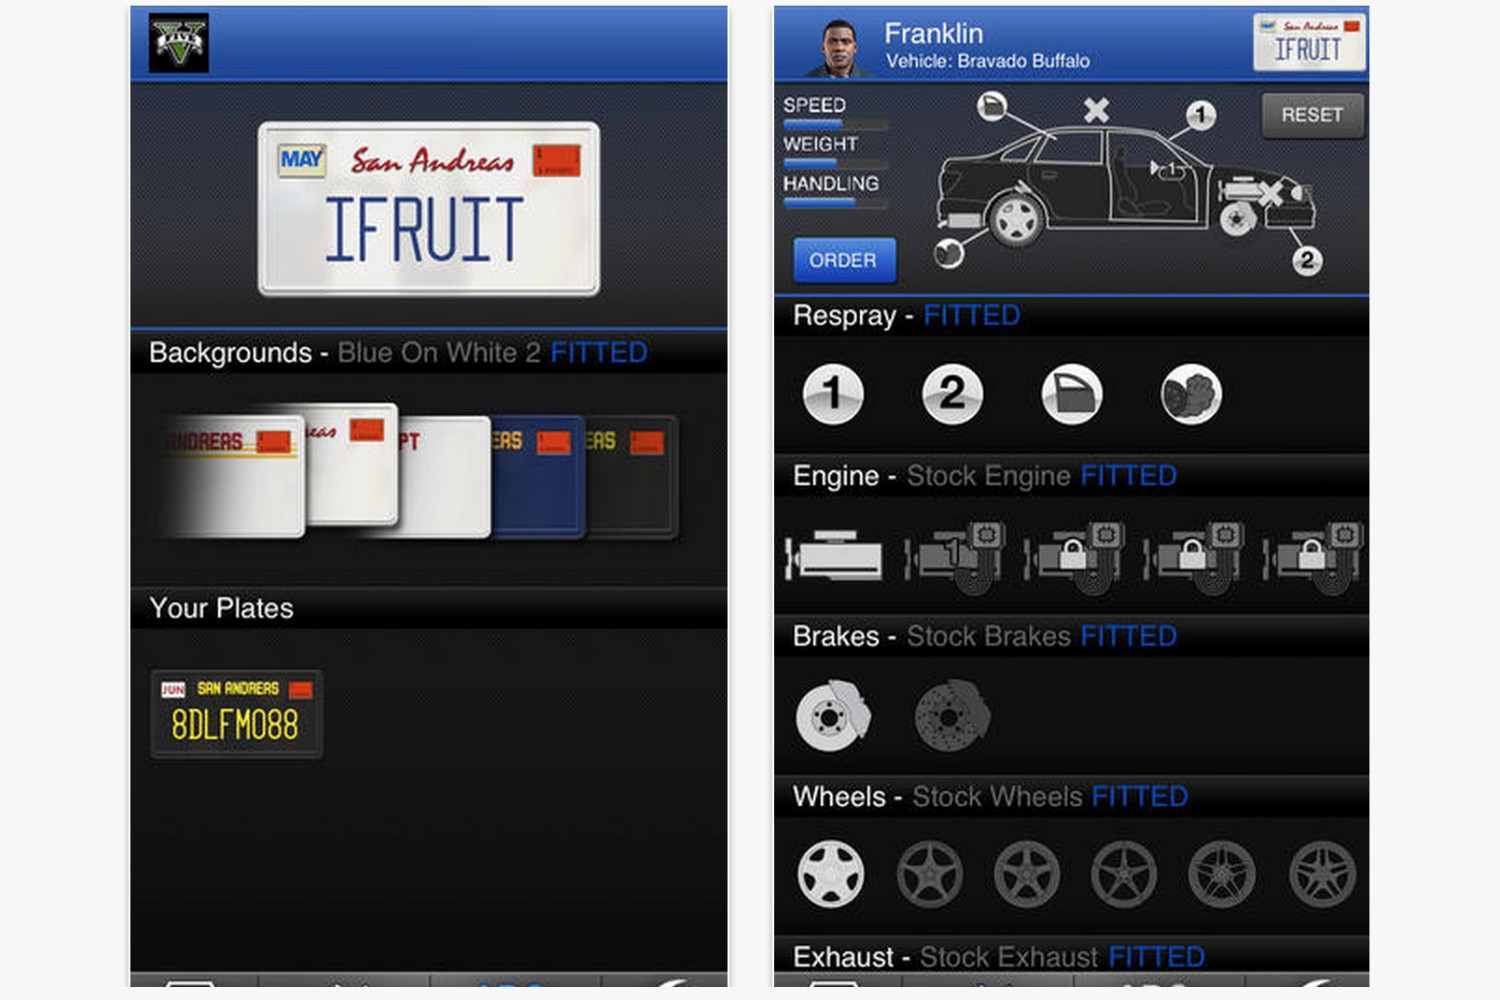 how-to-download-ifruit-app-in-gta-5-on-ps3